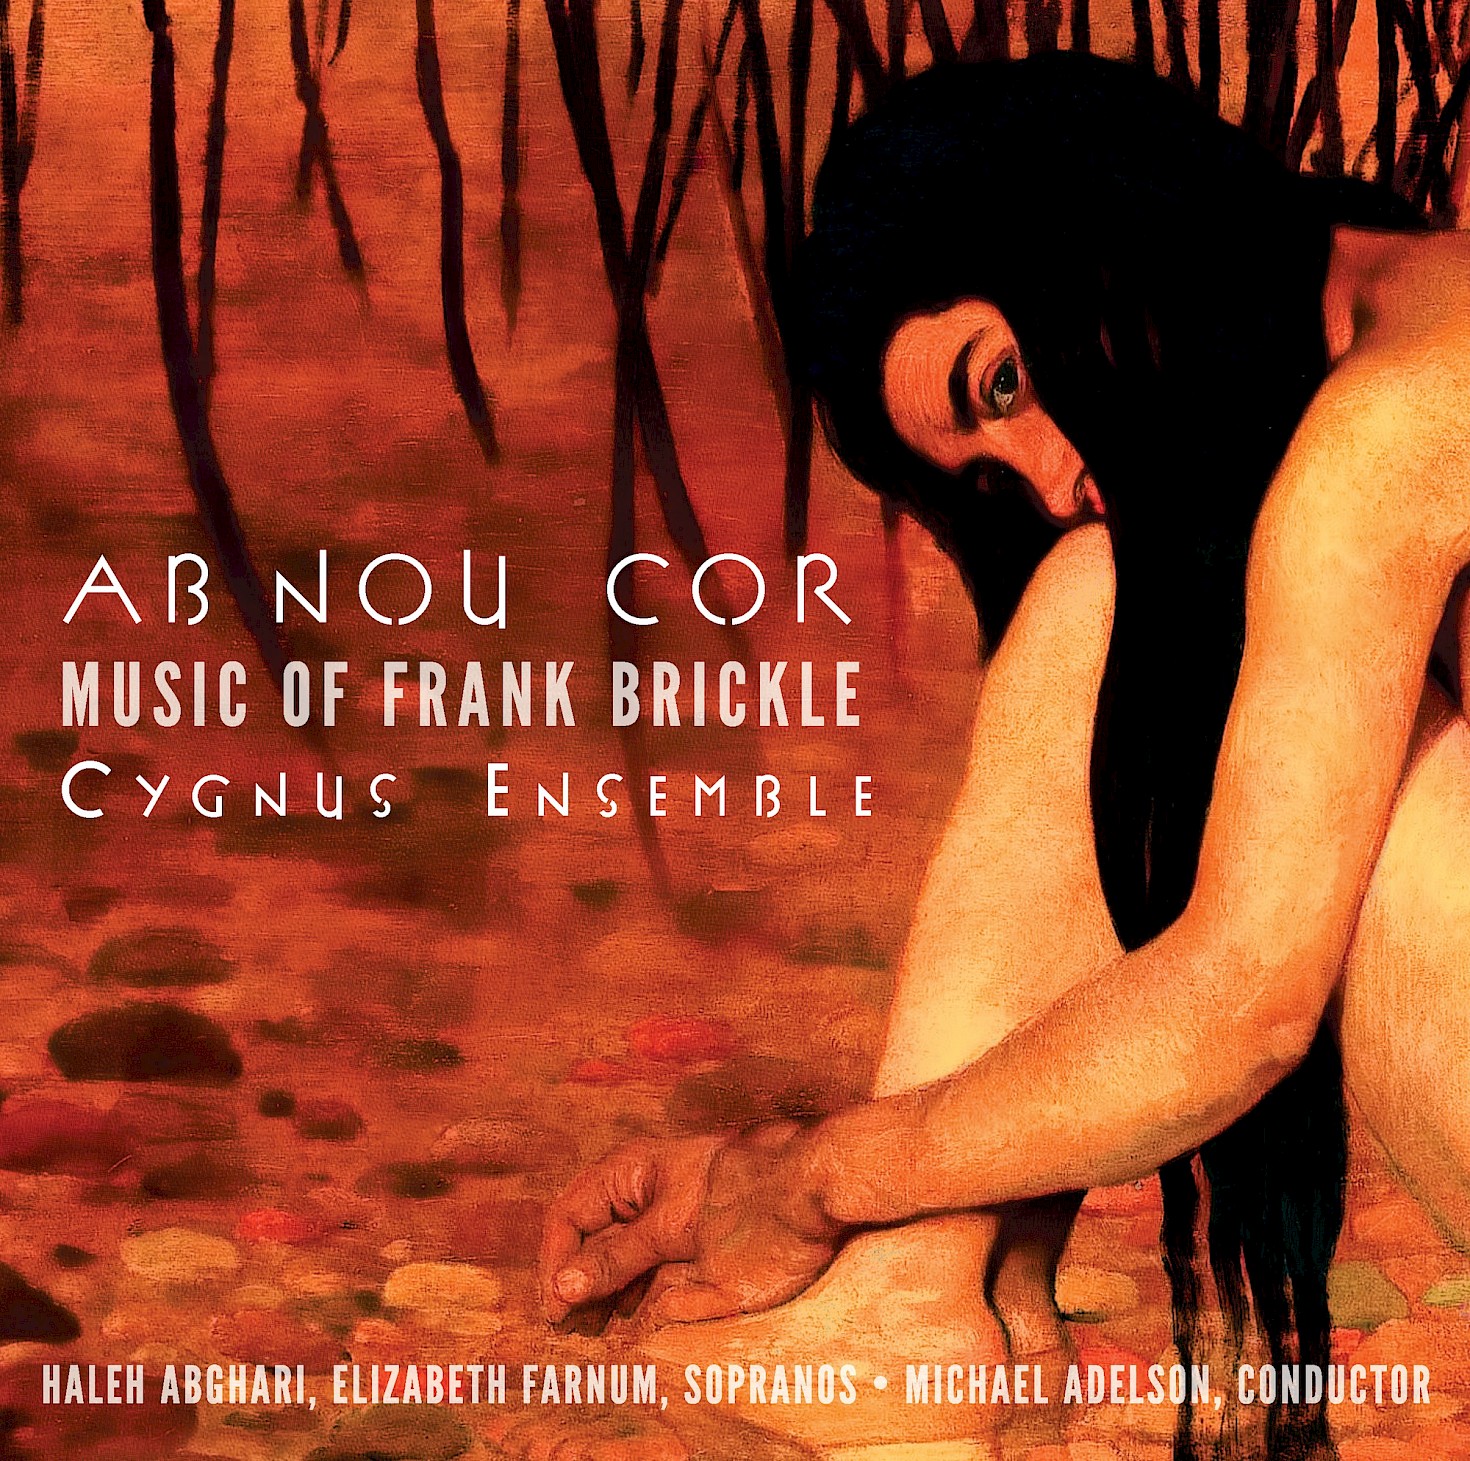 Ab nou cor: Music of Frank Brickle cover